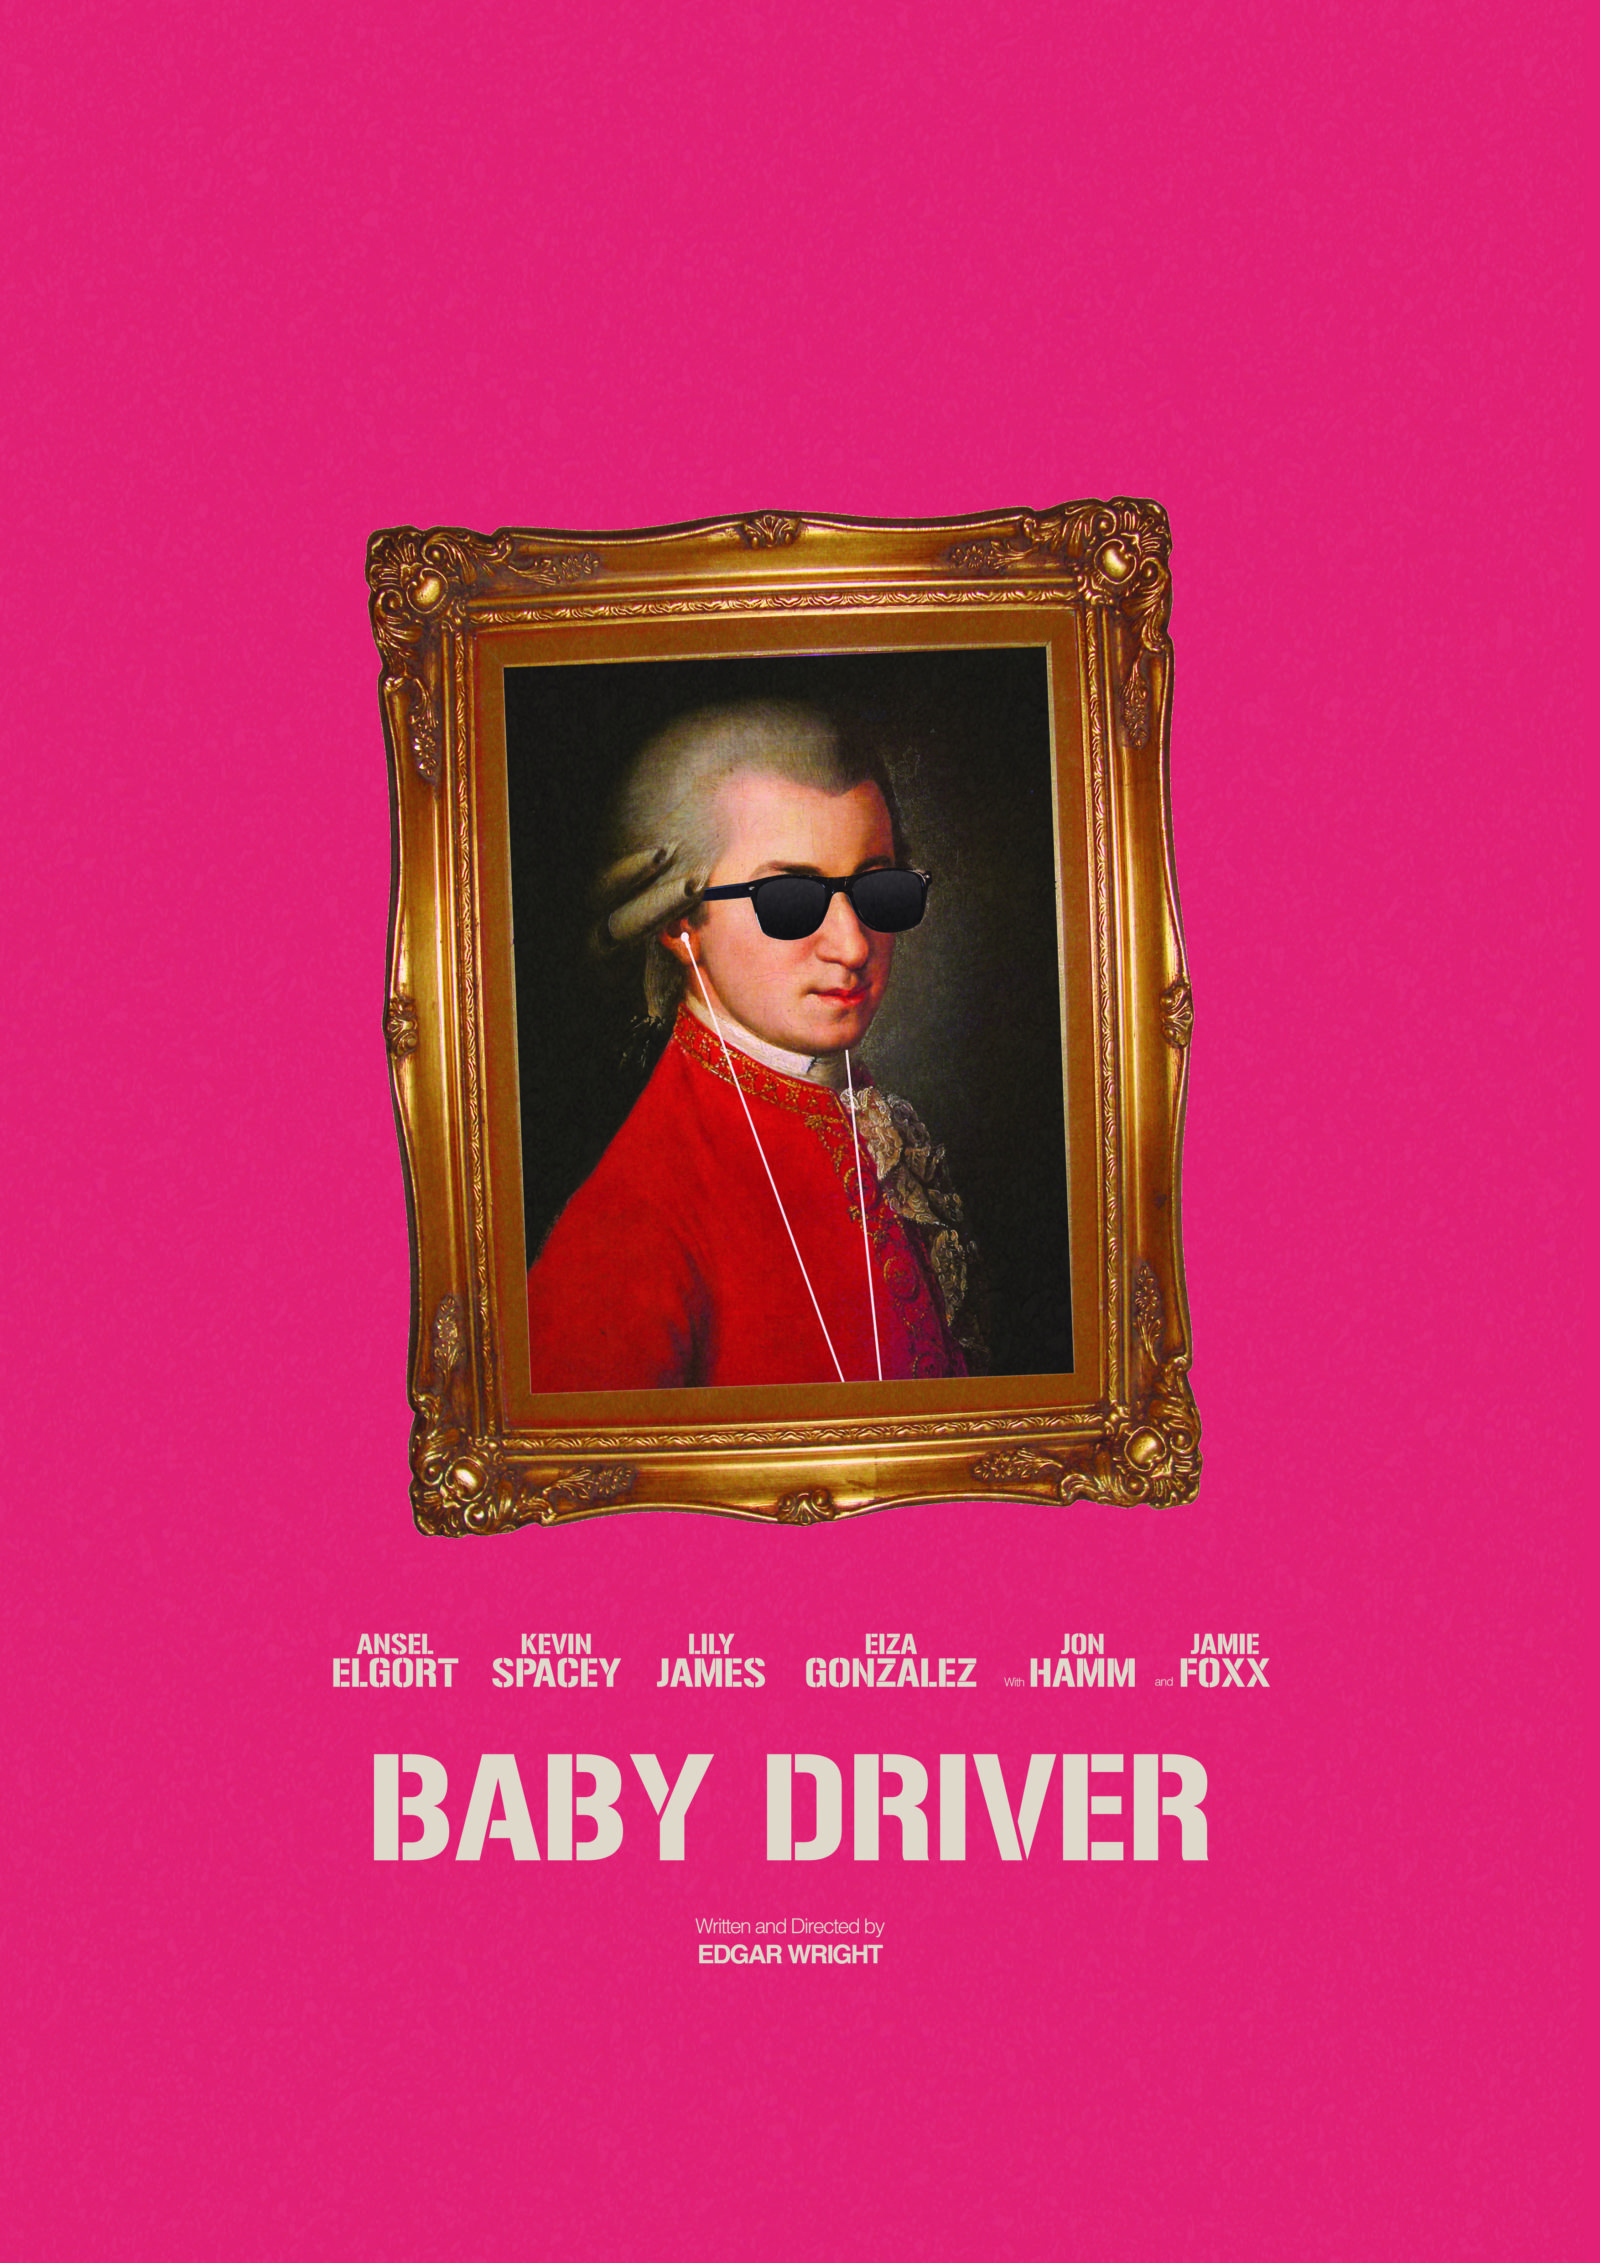 Baby Driver (2017) HD Wallpaper From Gallsource.com. 영화